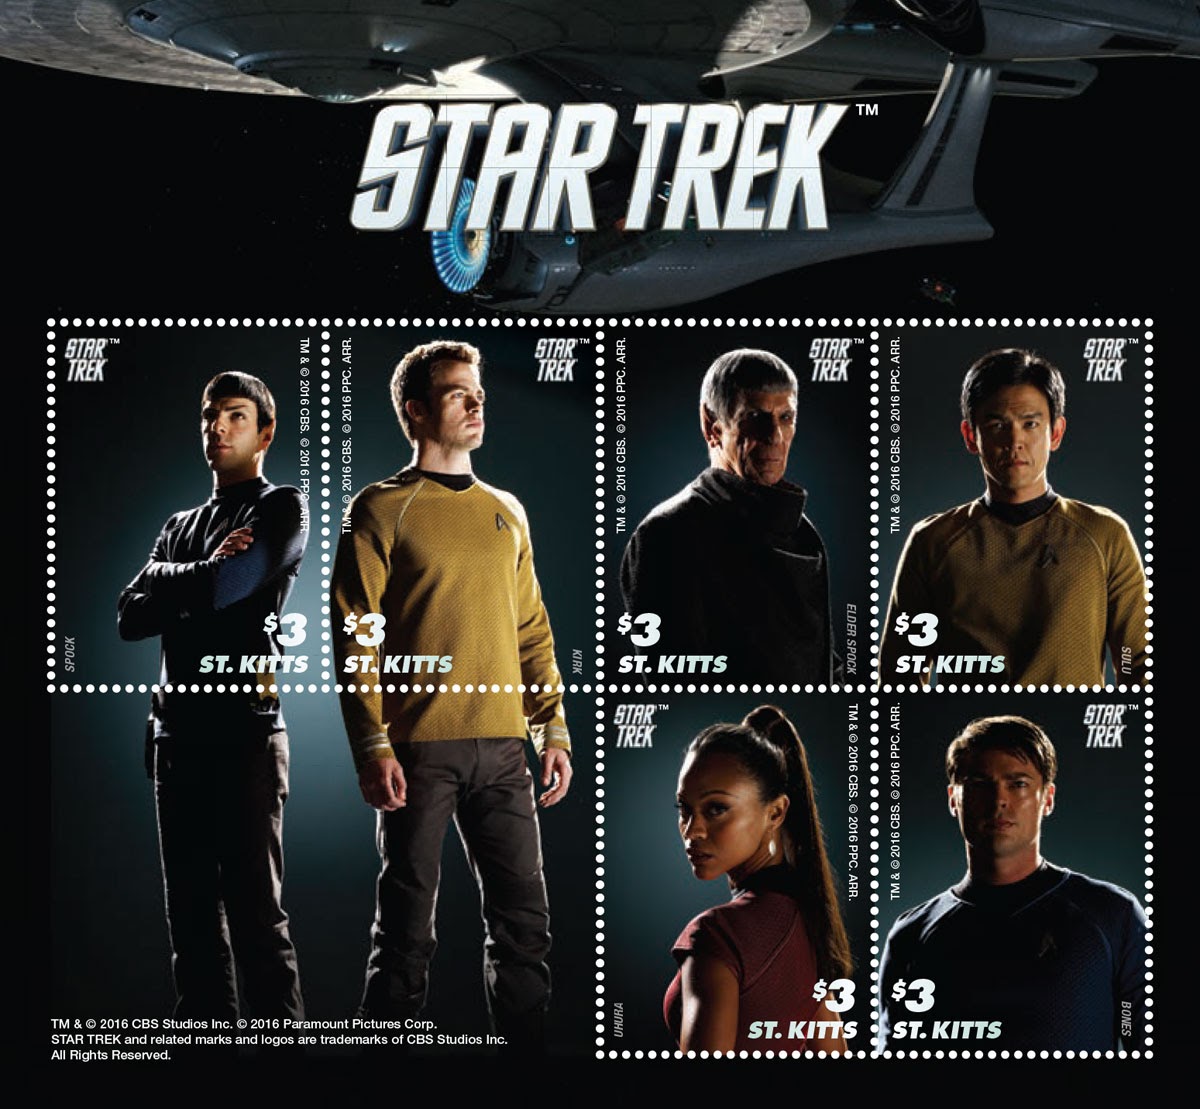 Star Trek stamps from St. Kitts and Nevis